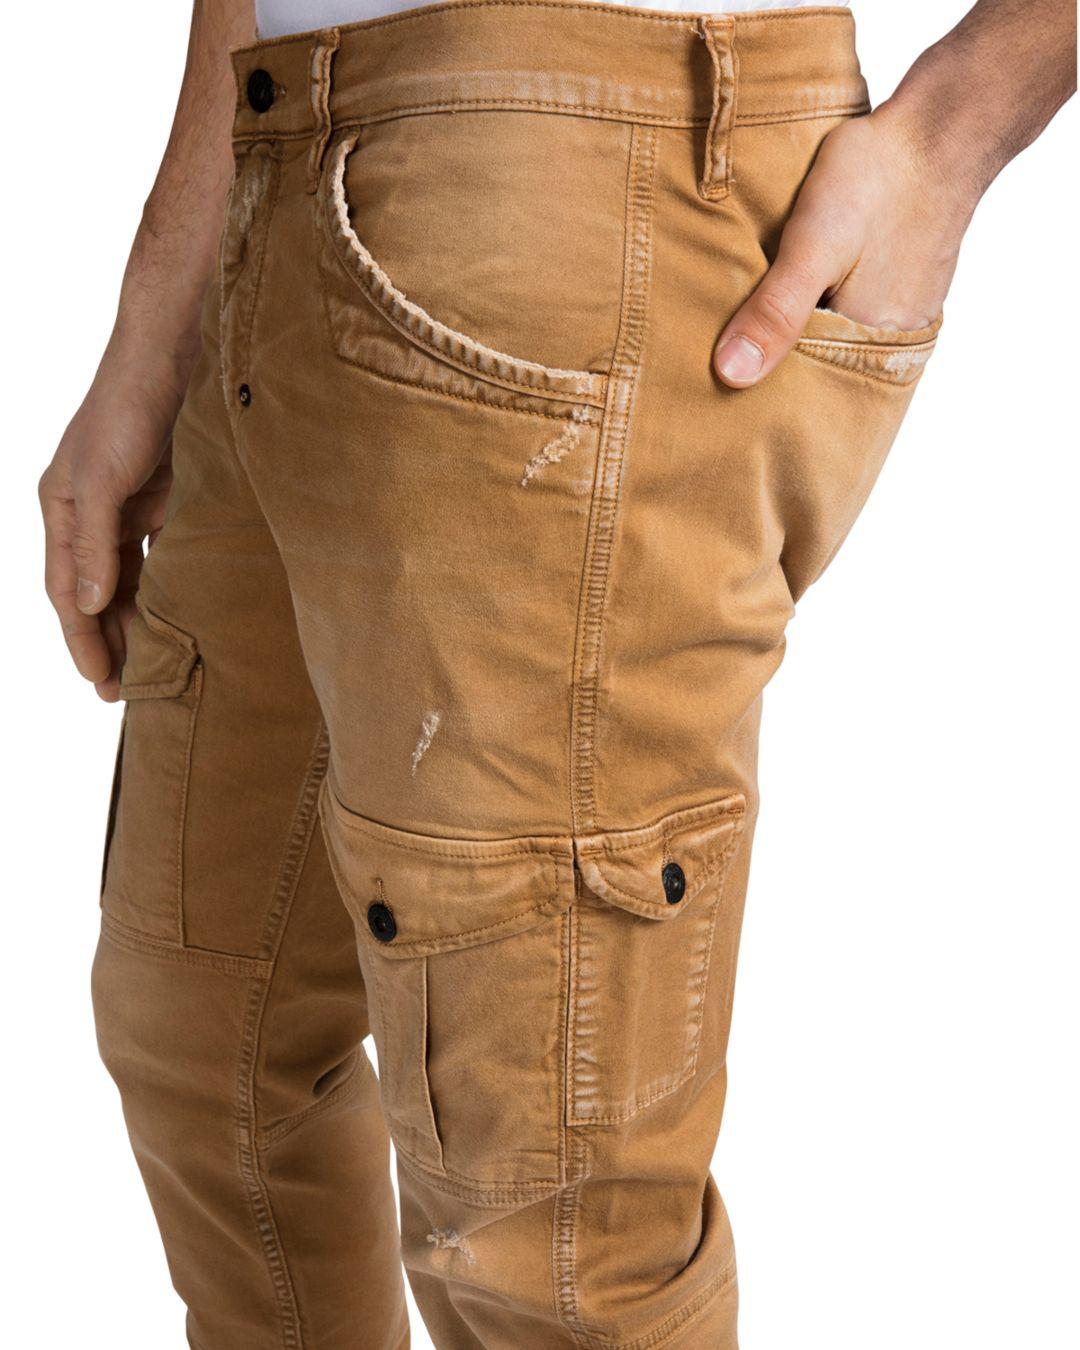 PRPS Faded Slim Fit Stretch Cargo Pants In Khaki in Natural for Men - Lyst